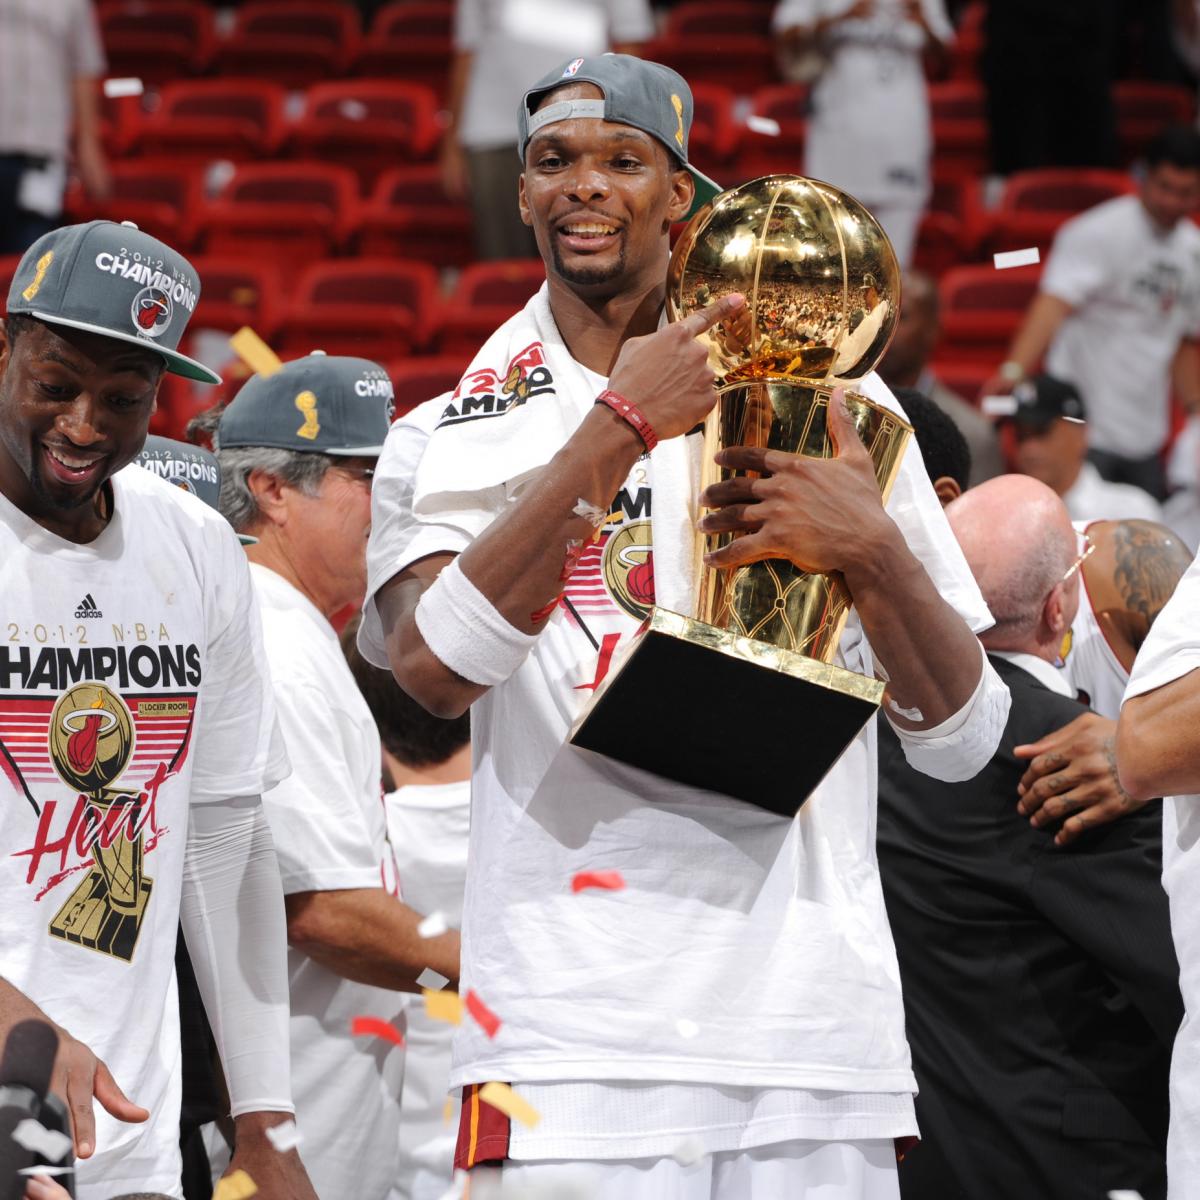 Chris Bosh to Have No. 1 Jersey Retired by Heat in March 26 Ceremony ...